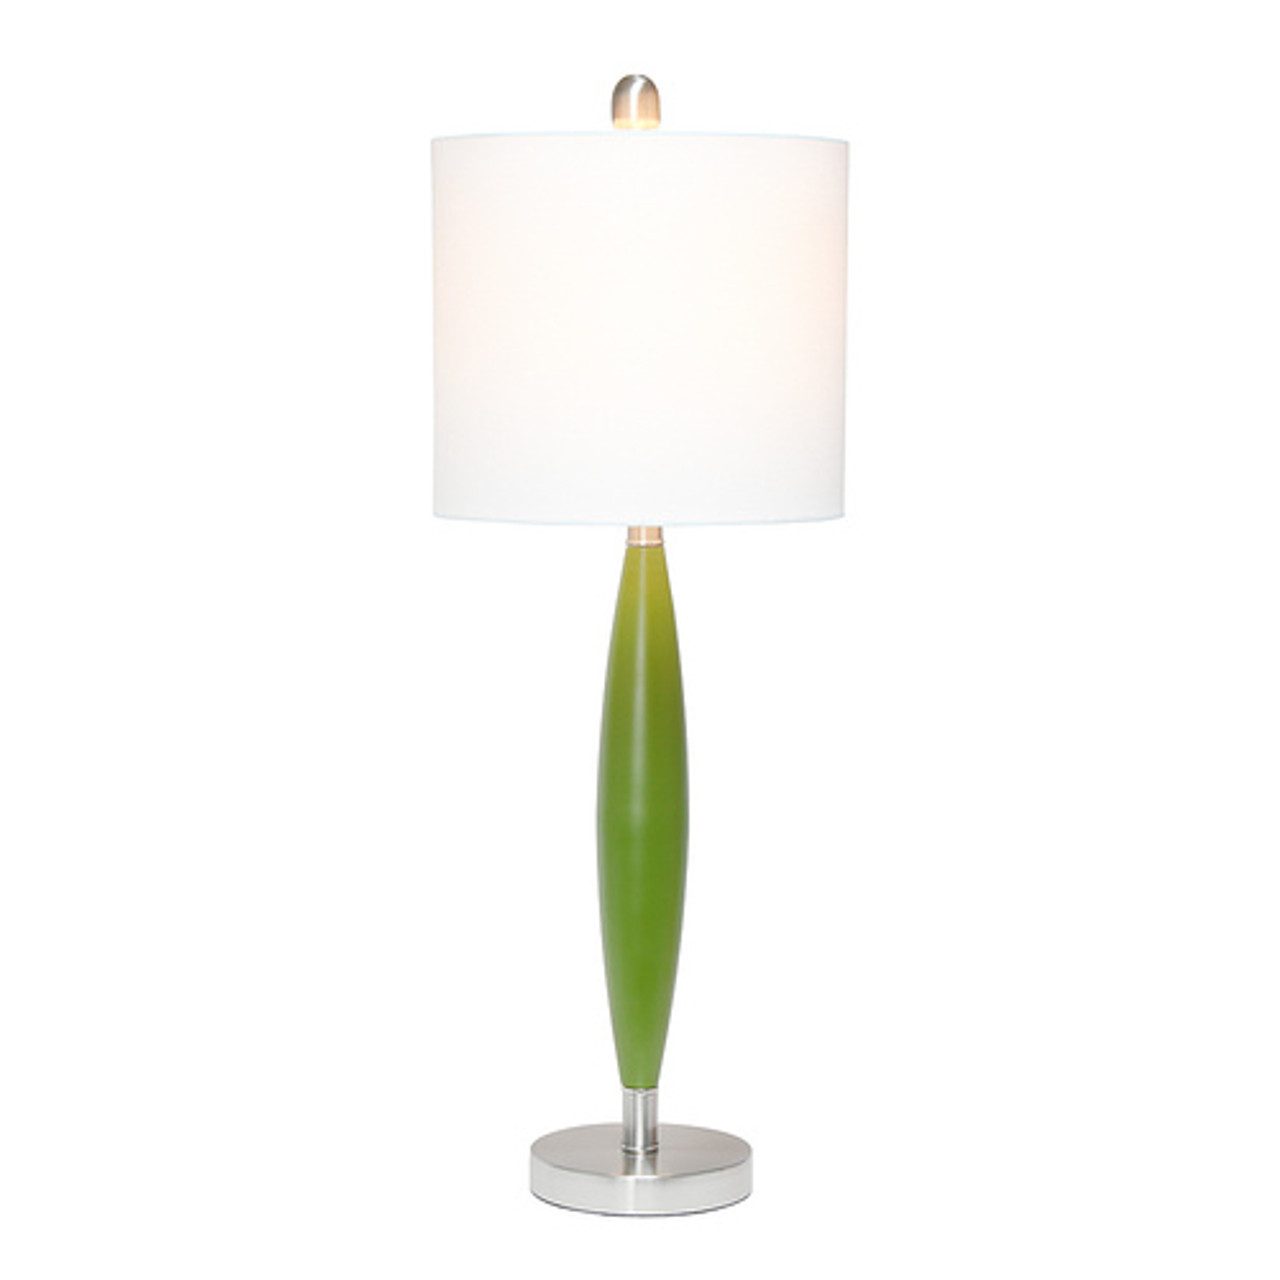 Lalia Home Stylus Table Lamp with White Fabric Shade, Green